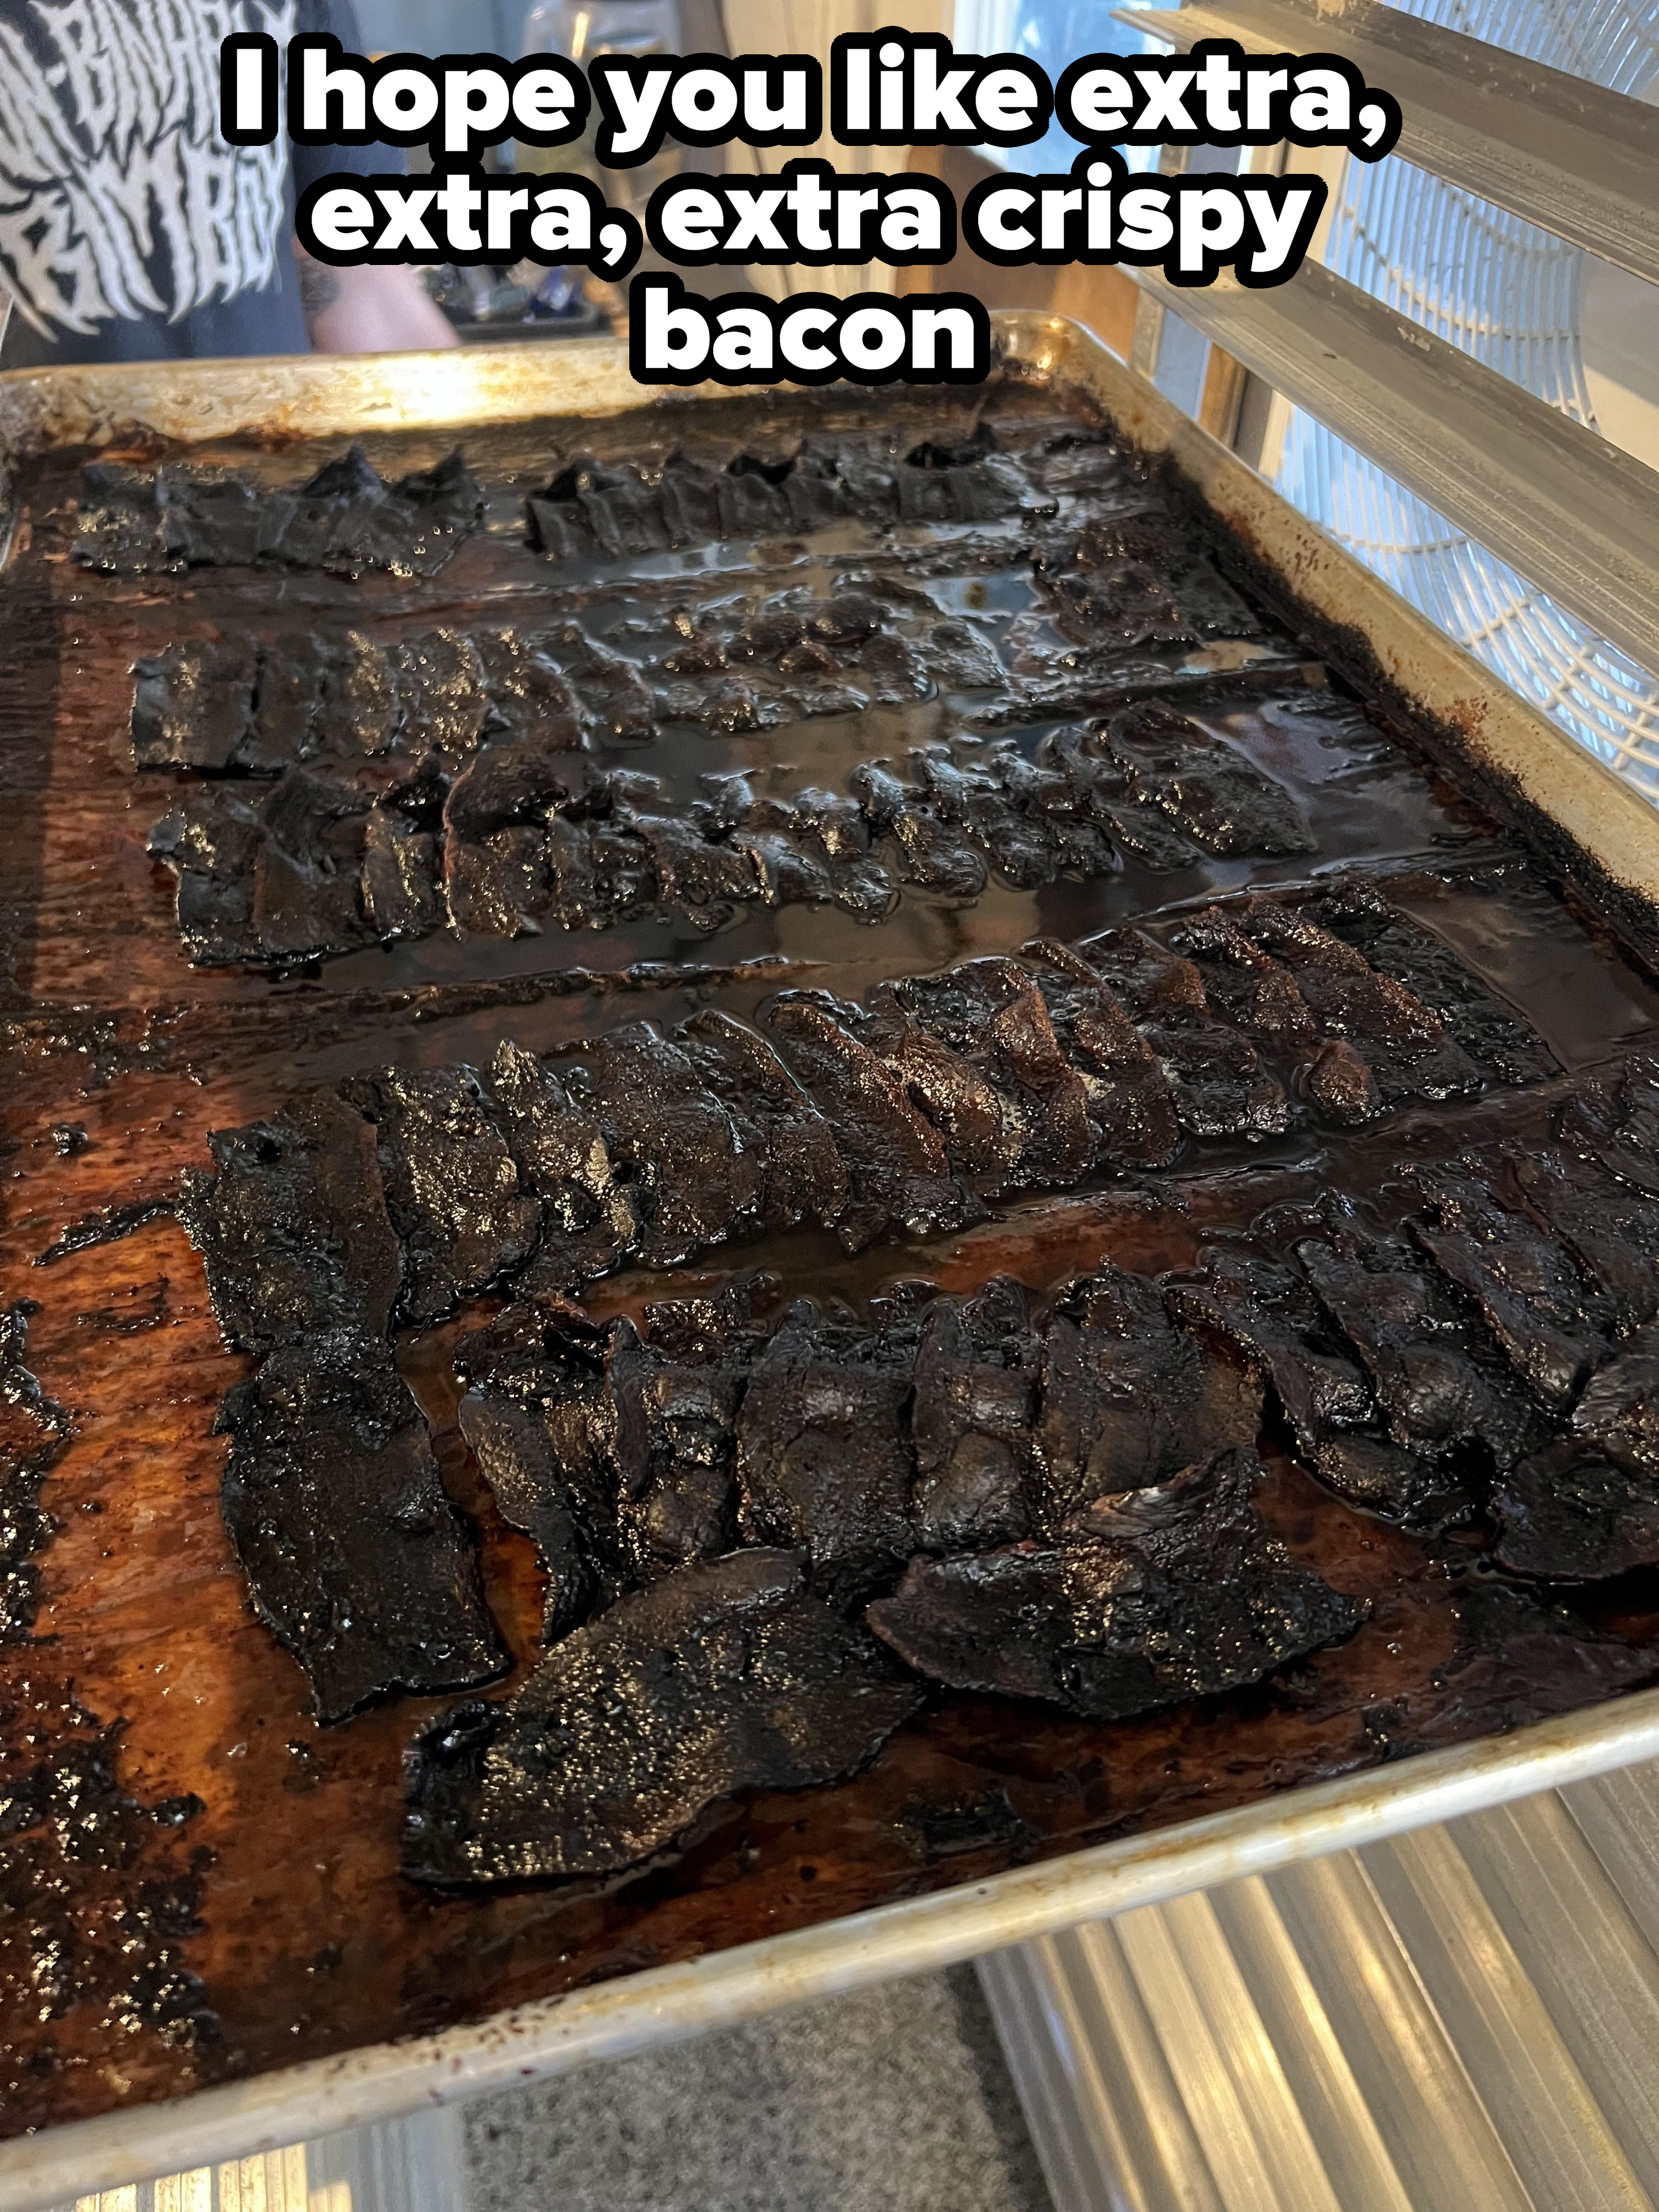 A tray of burnt bacon strips on a kitchen counter